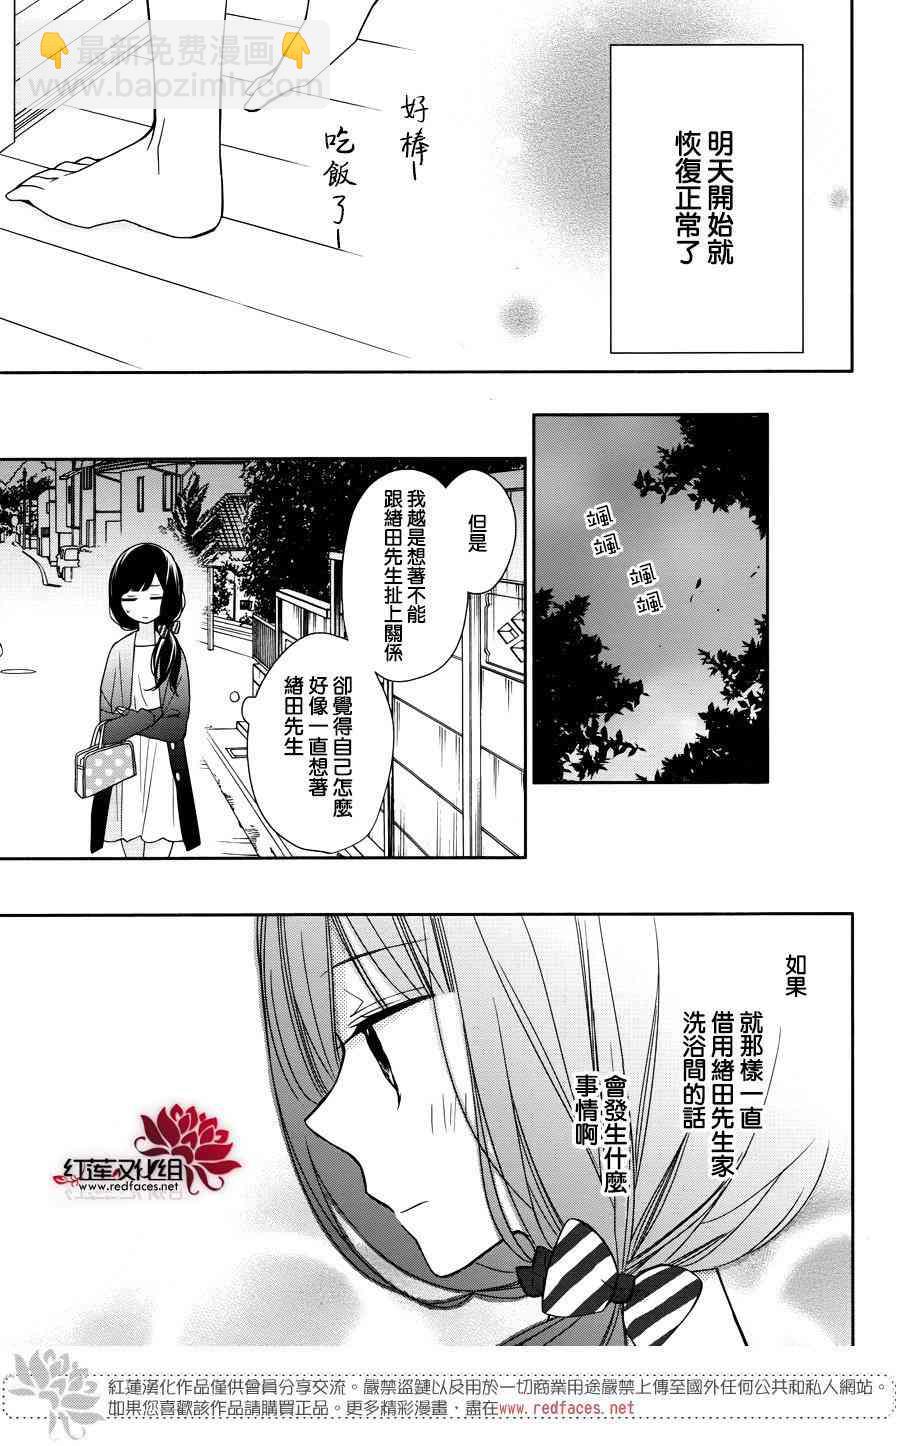 If given a second chance - 4話 - 3